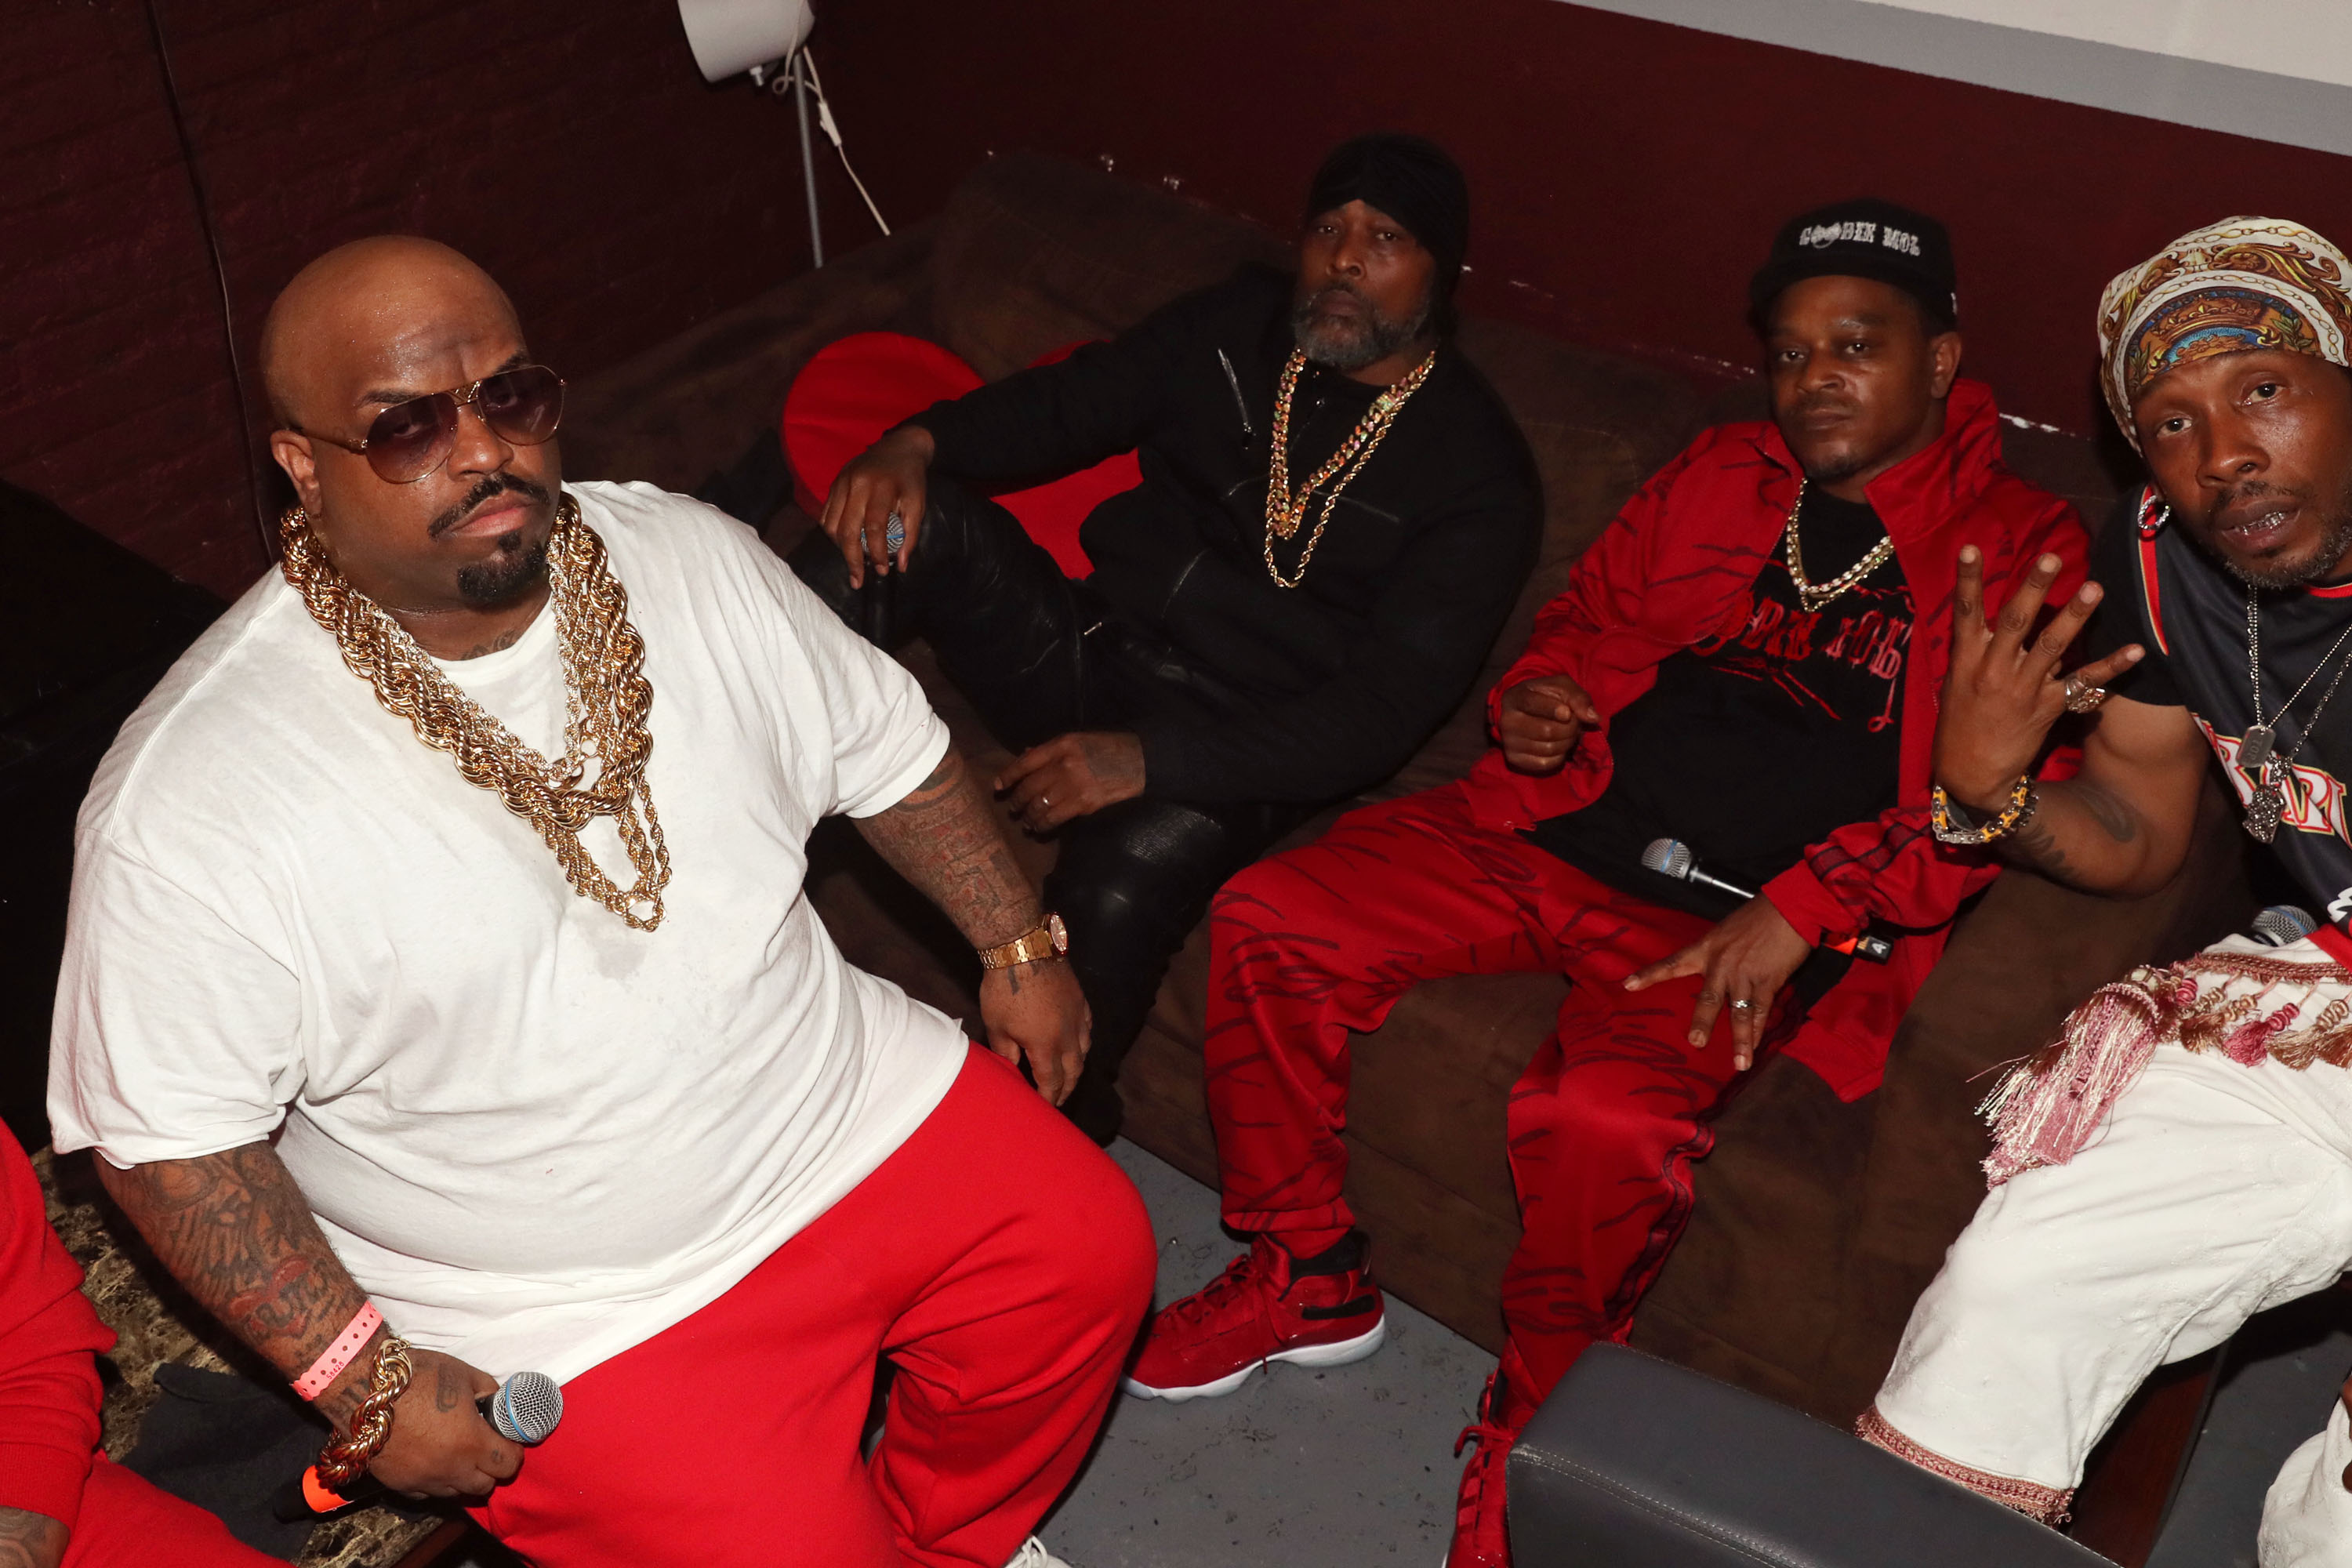 a picture of Goodie mob